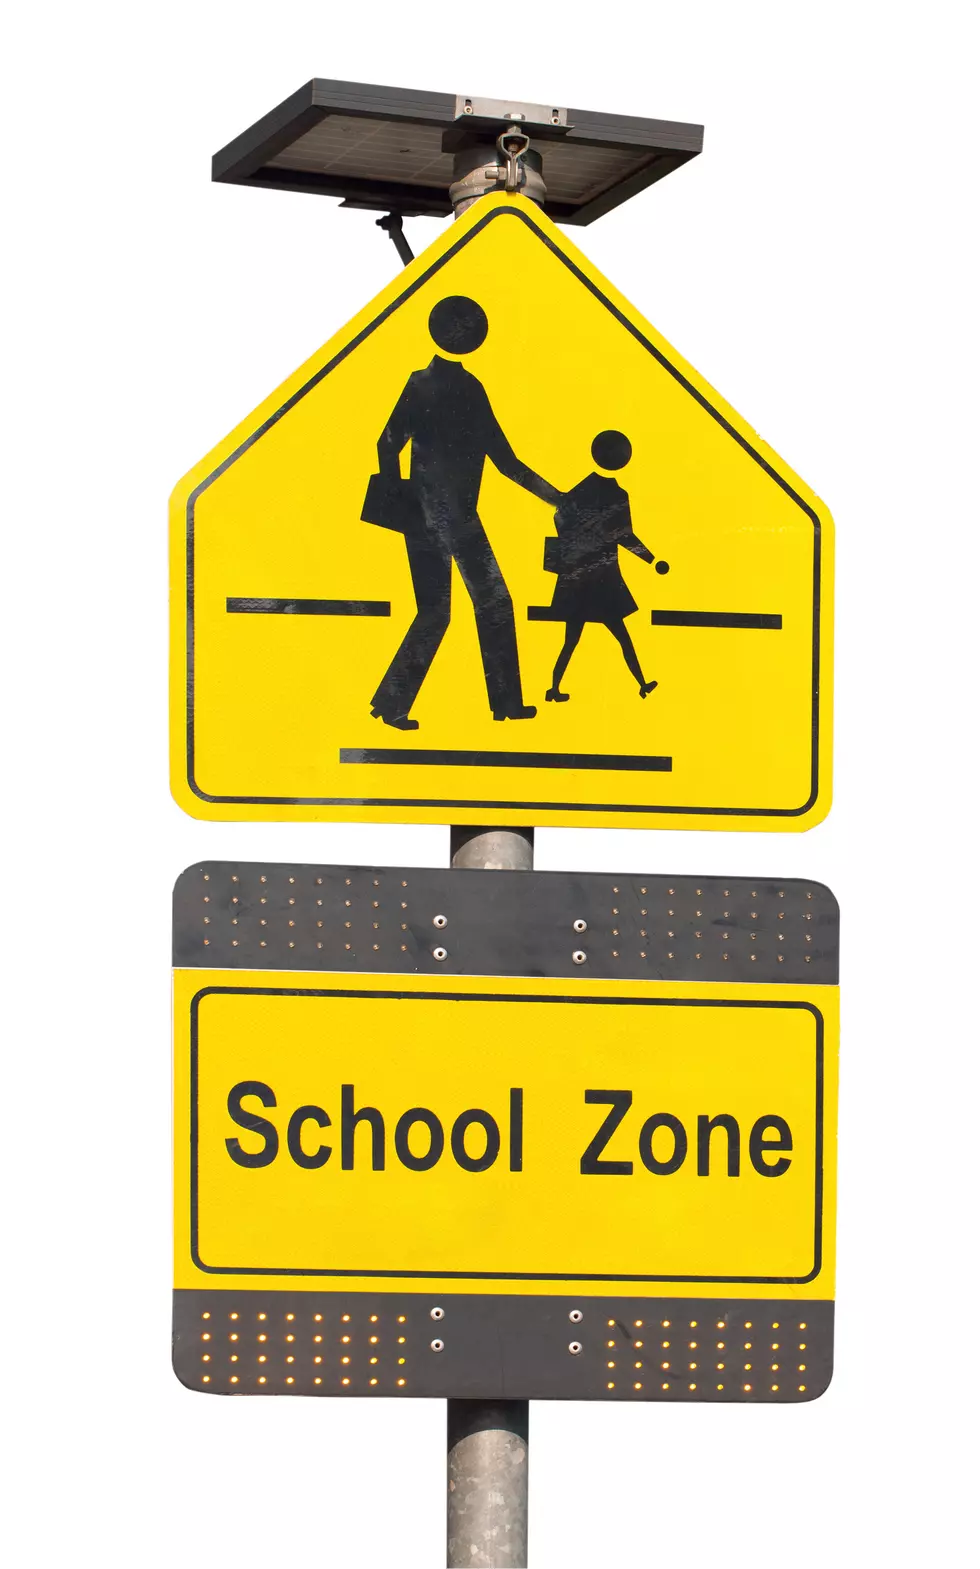 Do You Have to Obey School Zone Signs During the Summer Months?